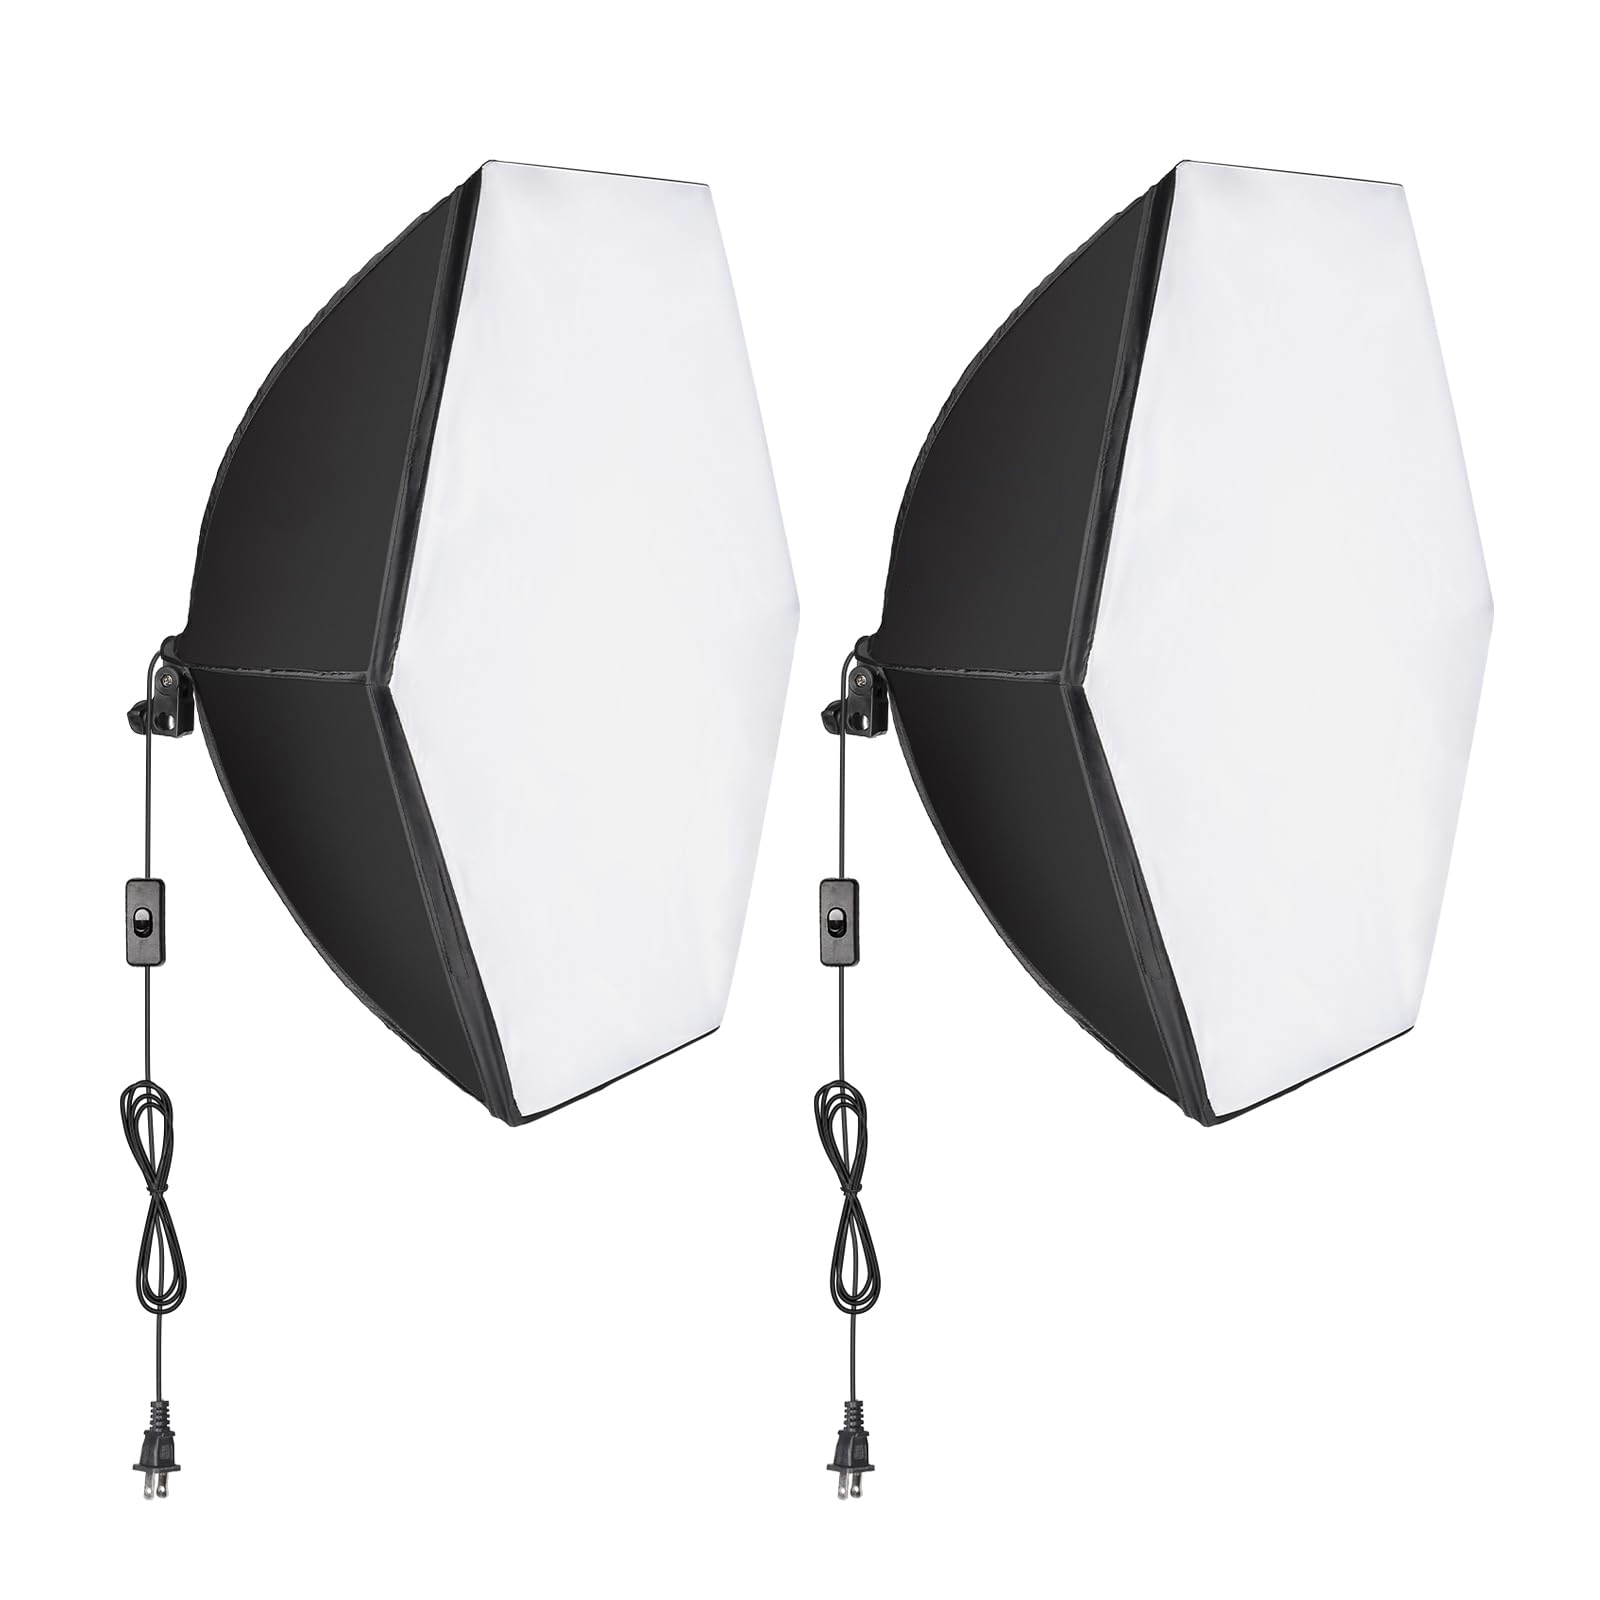 Softbox Lighting Kit -30"X30" Professional Studio Photography Equipment for Portrait Product Fashion Photography (Bulb and Light Stand not Included)-OXIMETERBUY